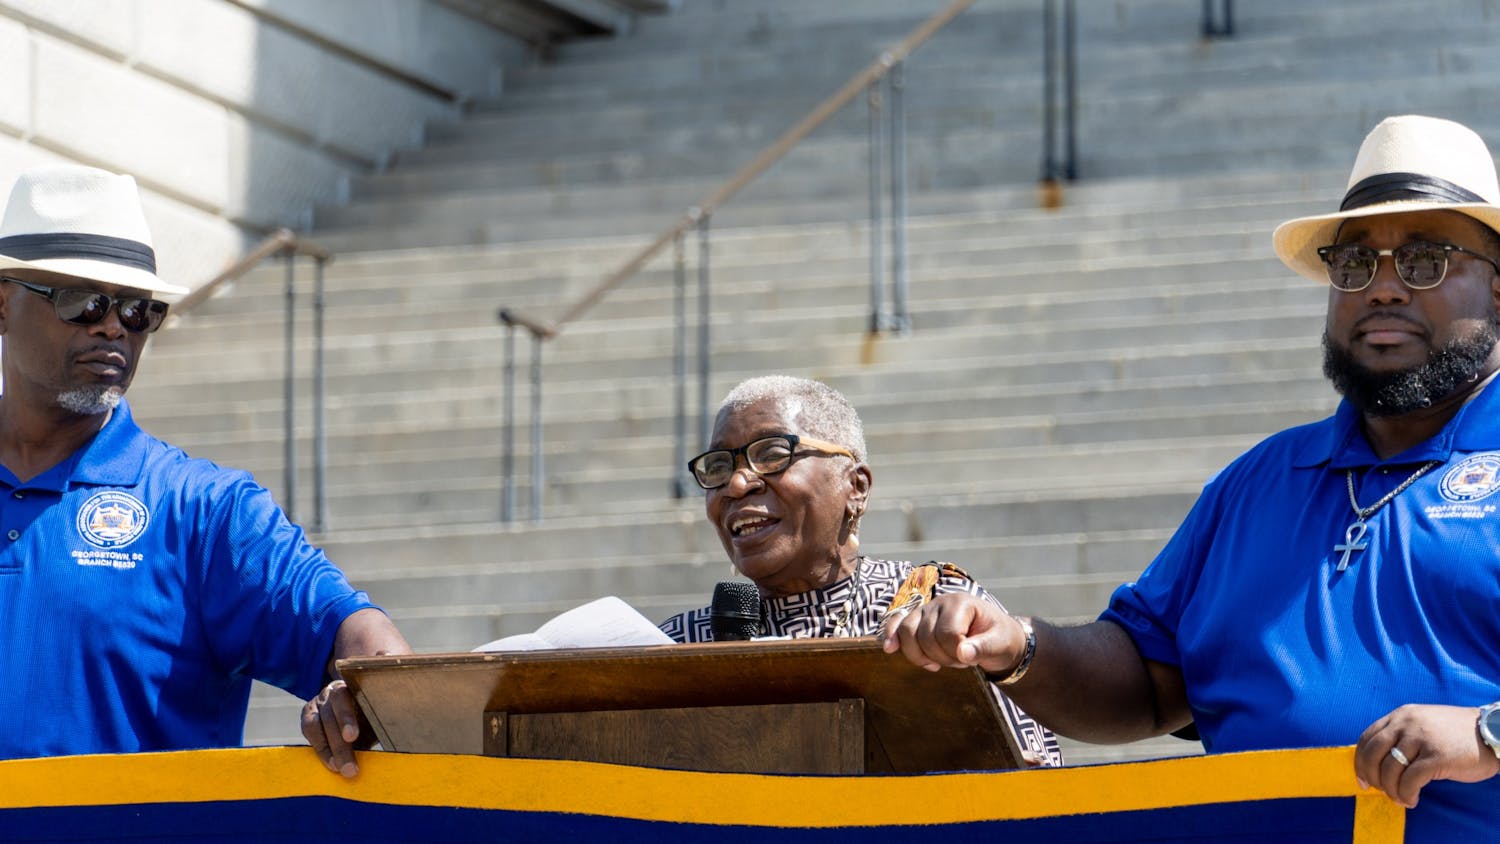 Speakers took to the stage during a rally held by South Carolina State Conference of the NAACP on April 23, 2022, to oppose the death penalty. The rally aimed save convicted citizens like Richard Moore from being inhumanely put to death in U.S prisons. 